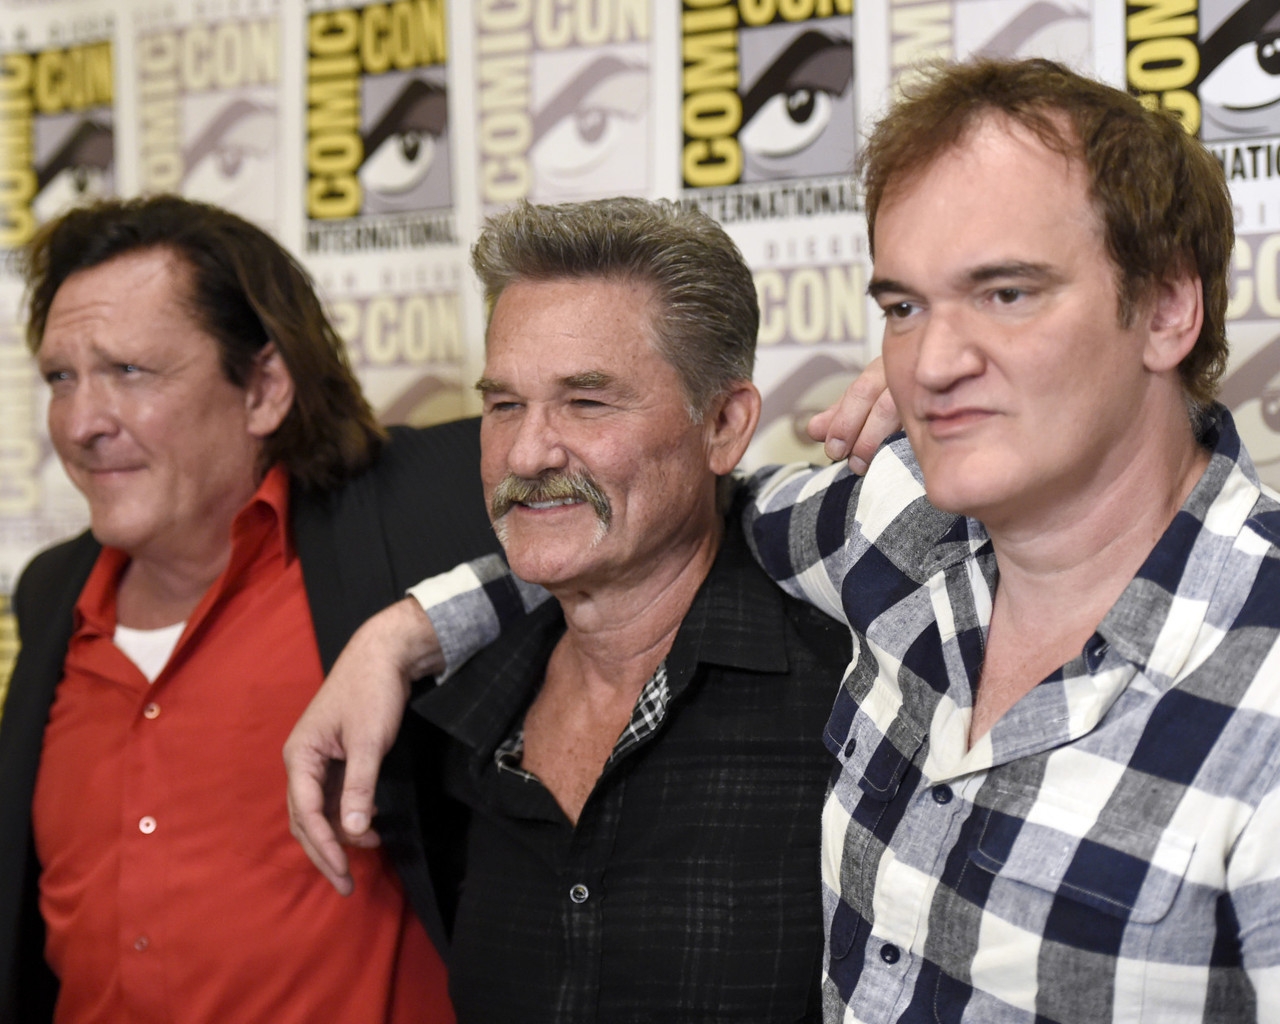 The Hateful Eight at Comic Con for 1280 x 1024 resolution